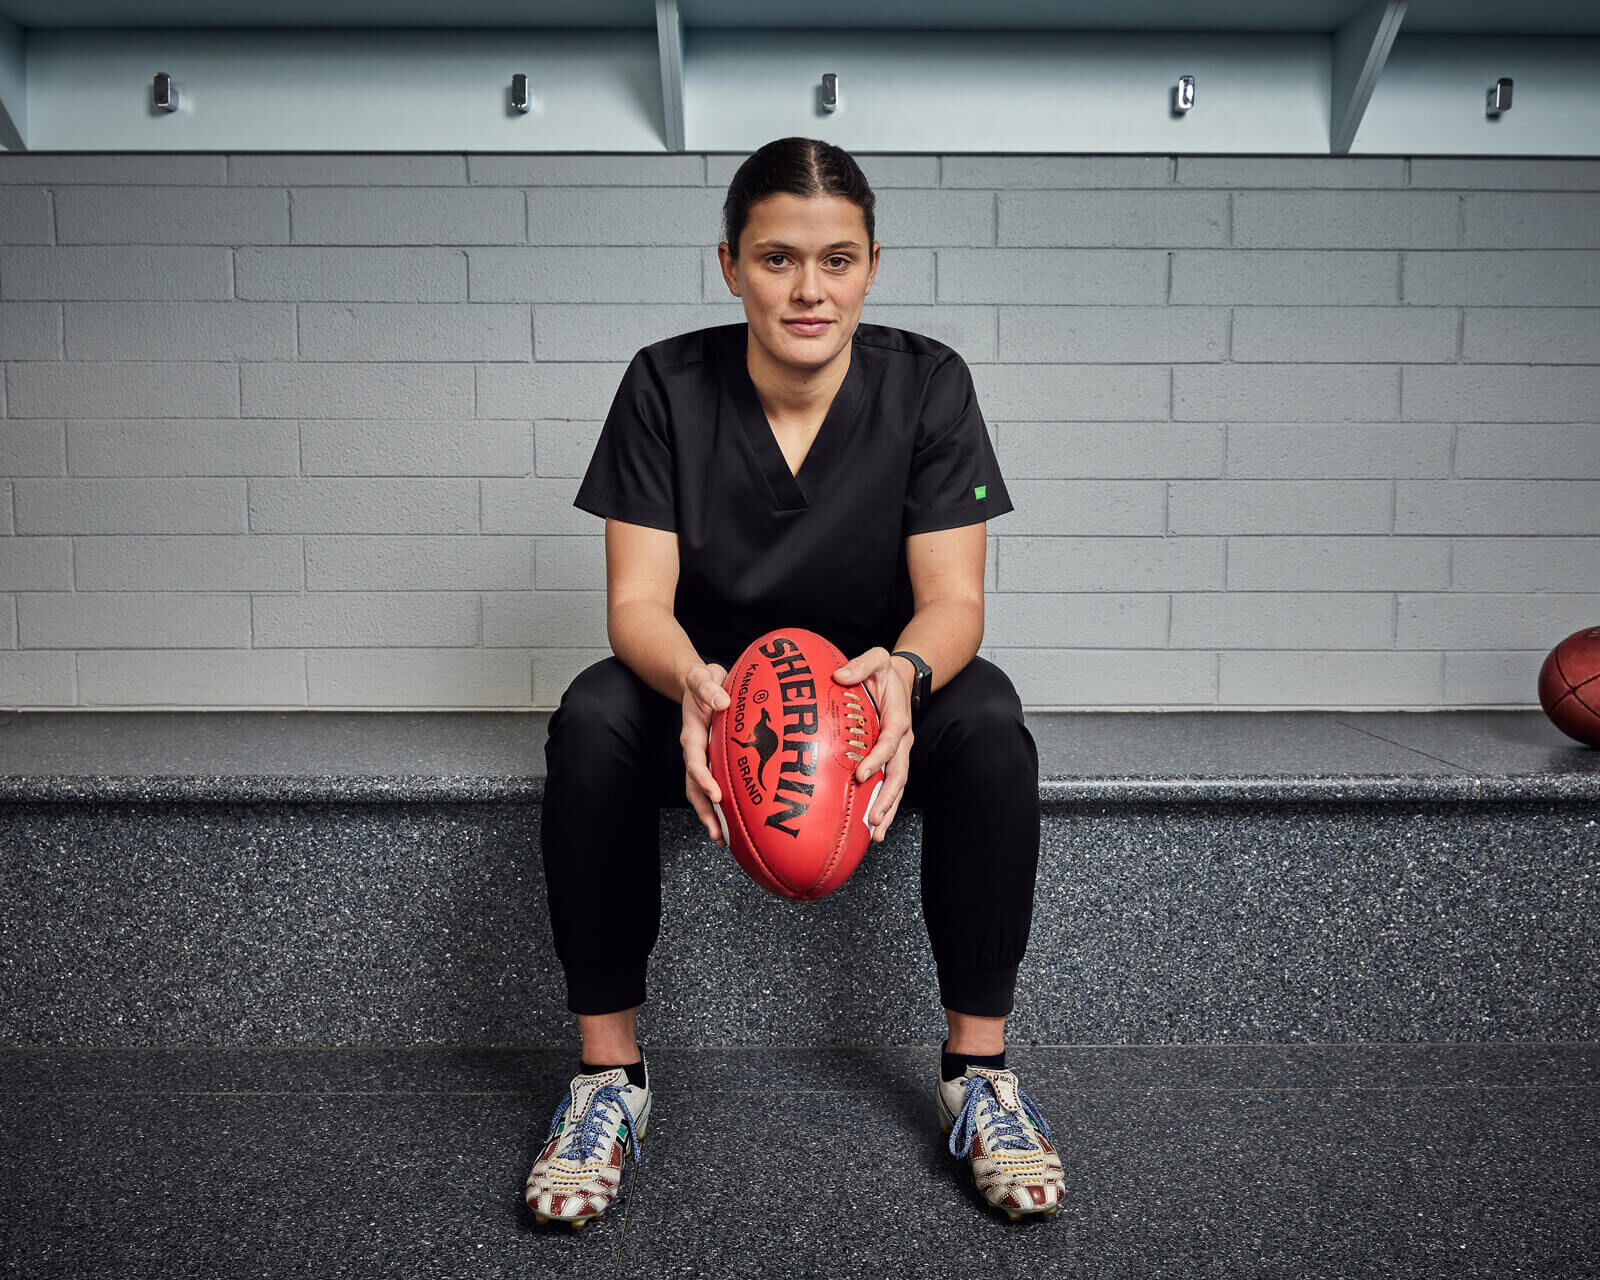 Nell - AFLW player and registered nurse